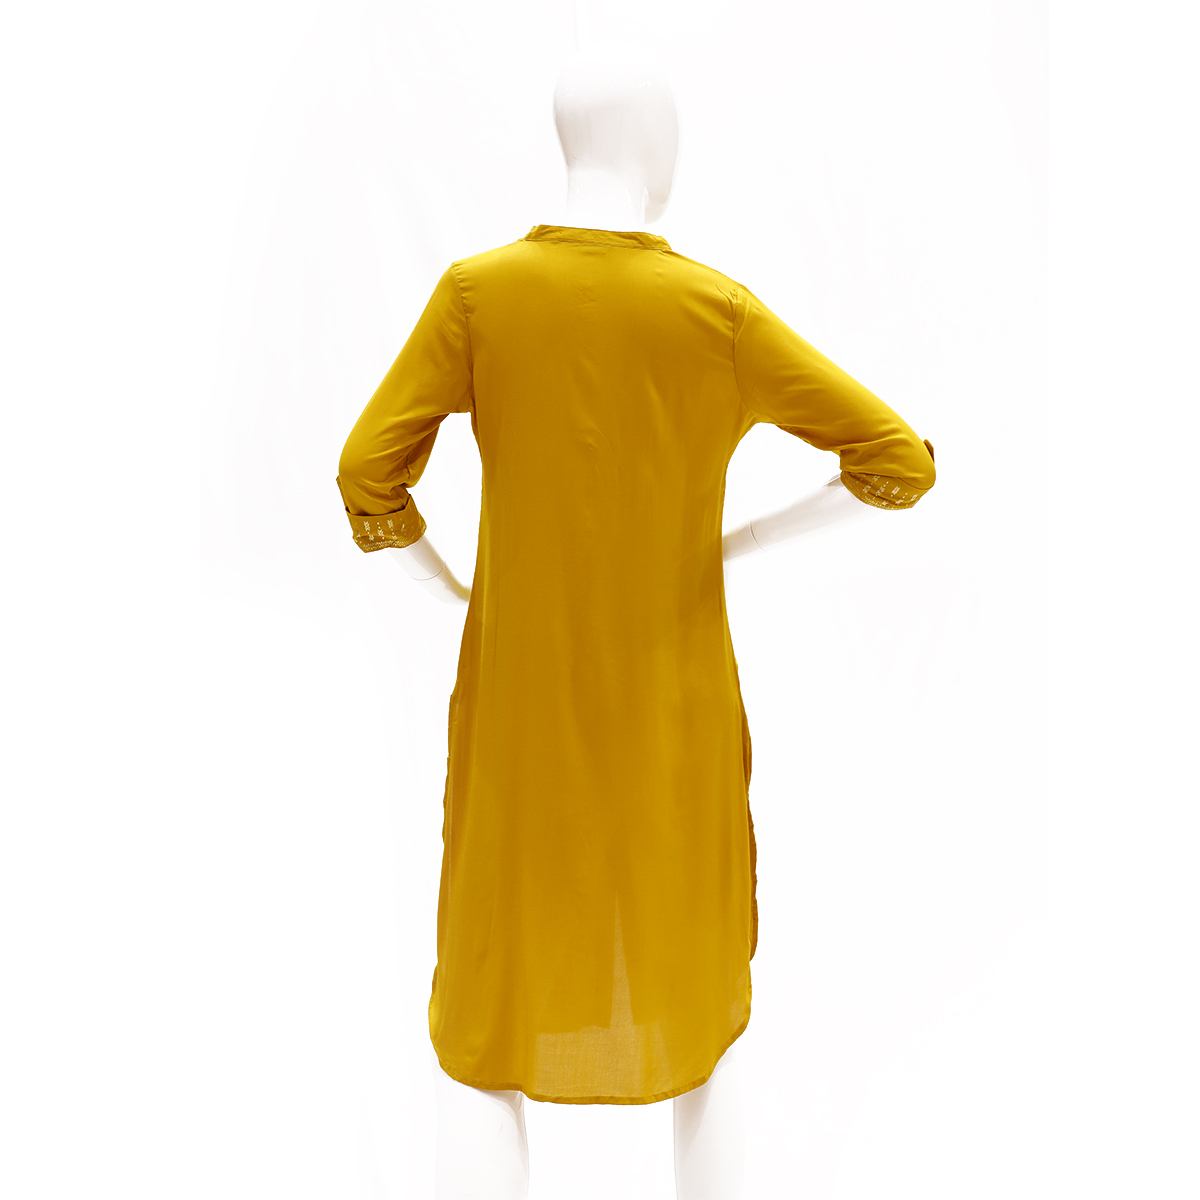 Desi Belle A Line Kurta With Flat Band Collar And Front Open Placket -Mustard